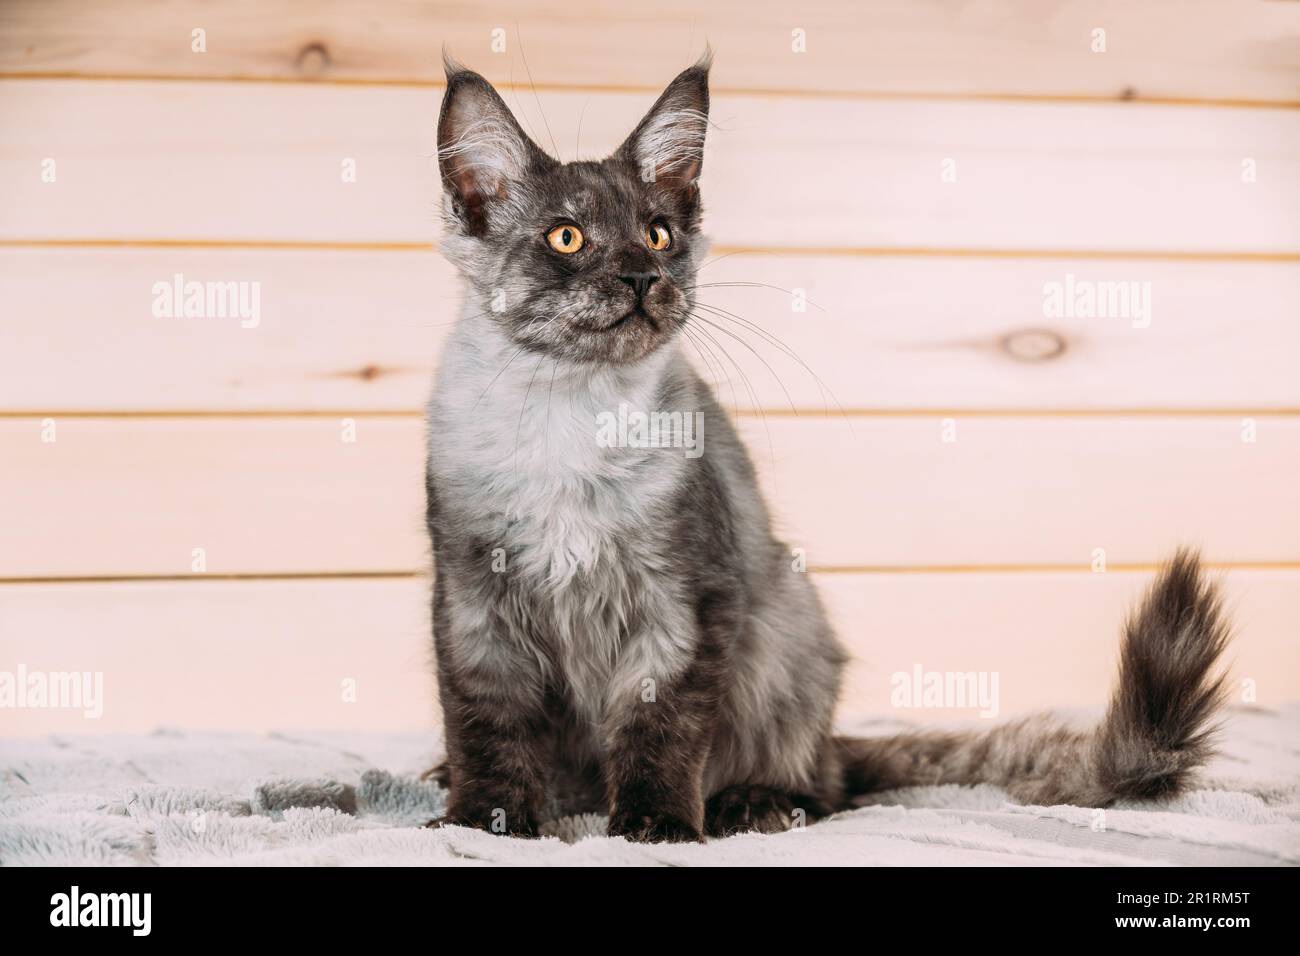 Funny Curious Black Silver Tabby Maine Coon Cat Sitting At Home Sofa. Coon Cat, Maine Cat, Maine Shag. Amazing Pets Pet. Stock Photo